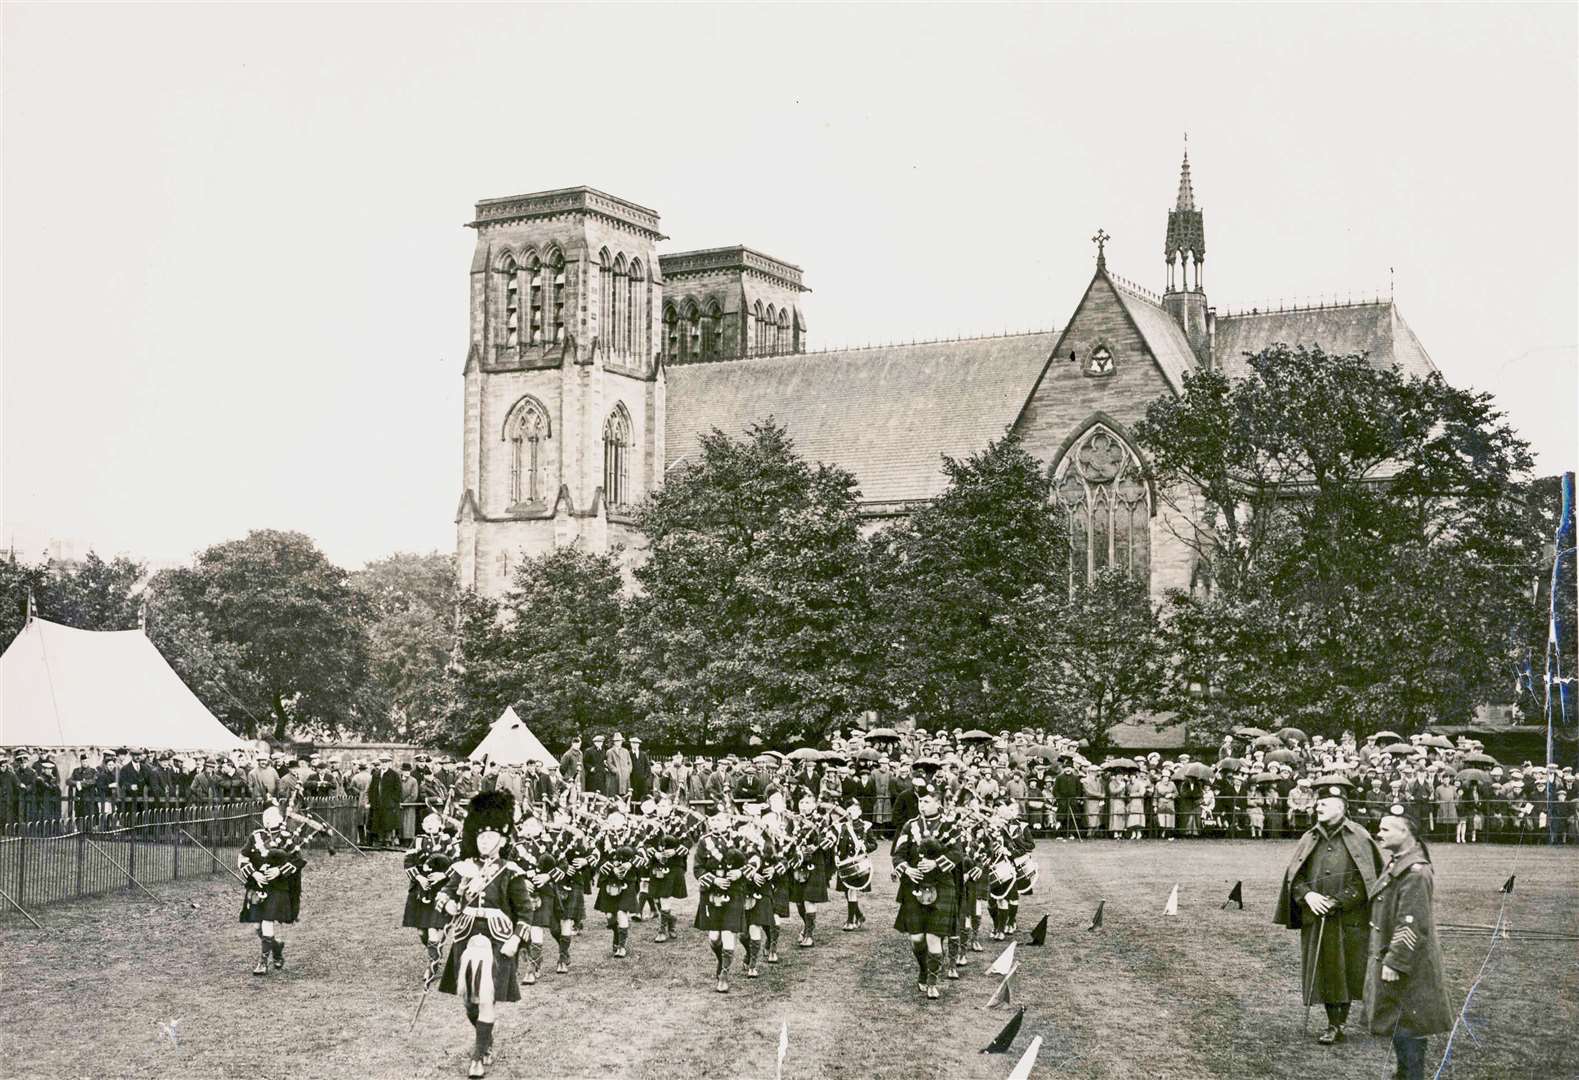 The pipes and drums of the Queen Victoria School Band performing at the 1927 Northern Meeting Games at the Northern Meeting Park in Inverness.